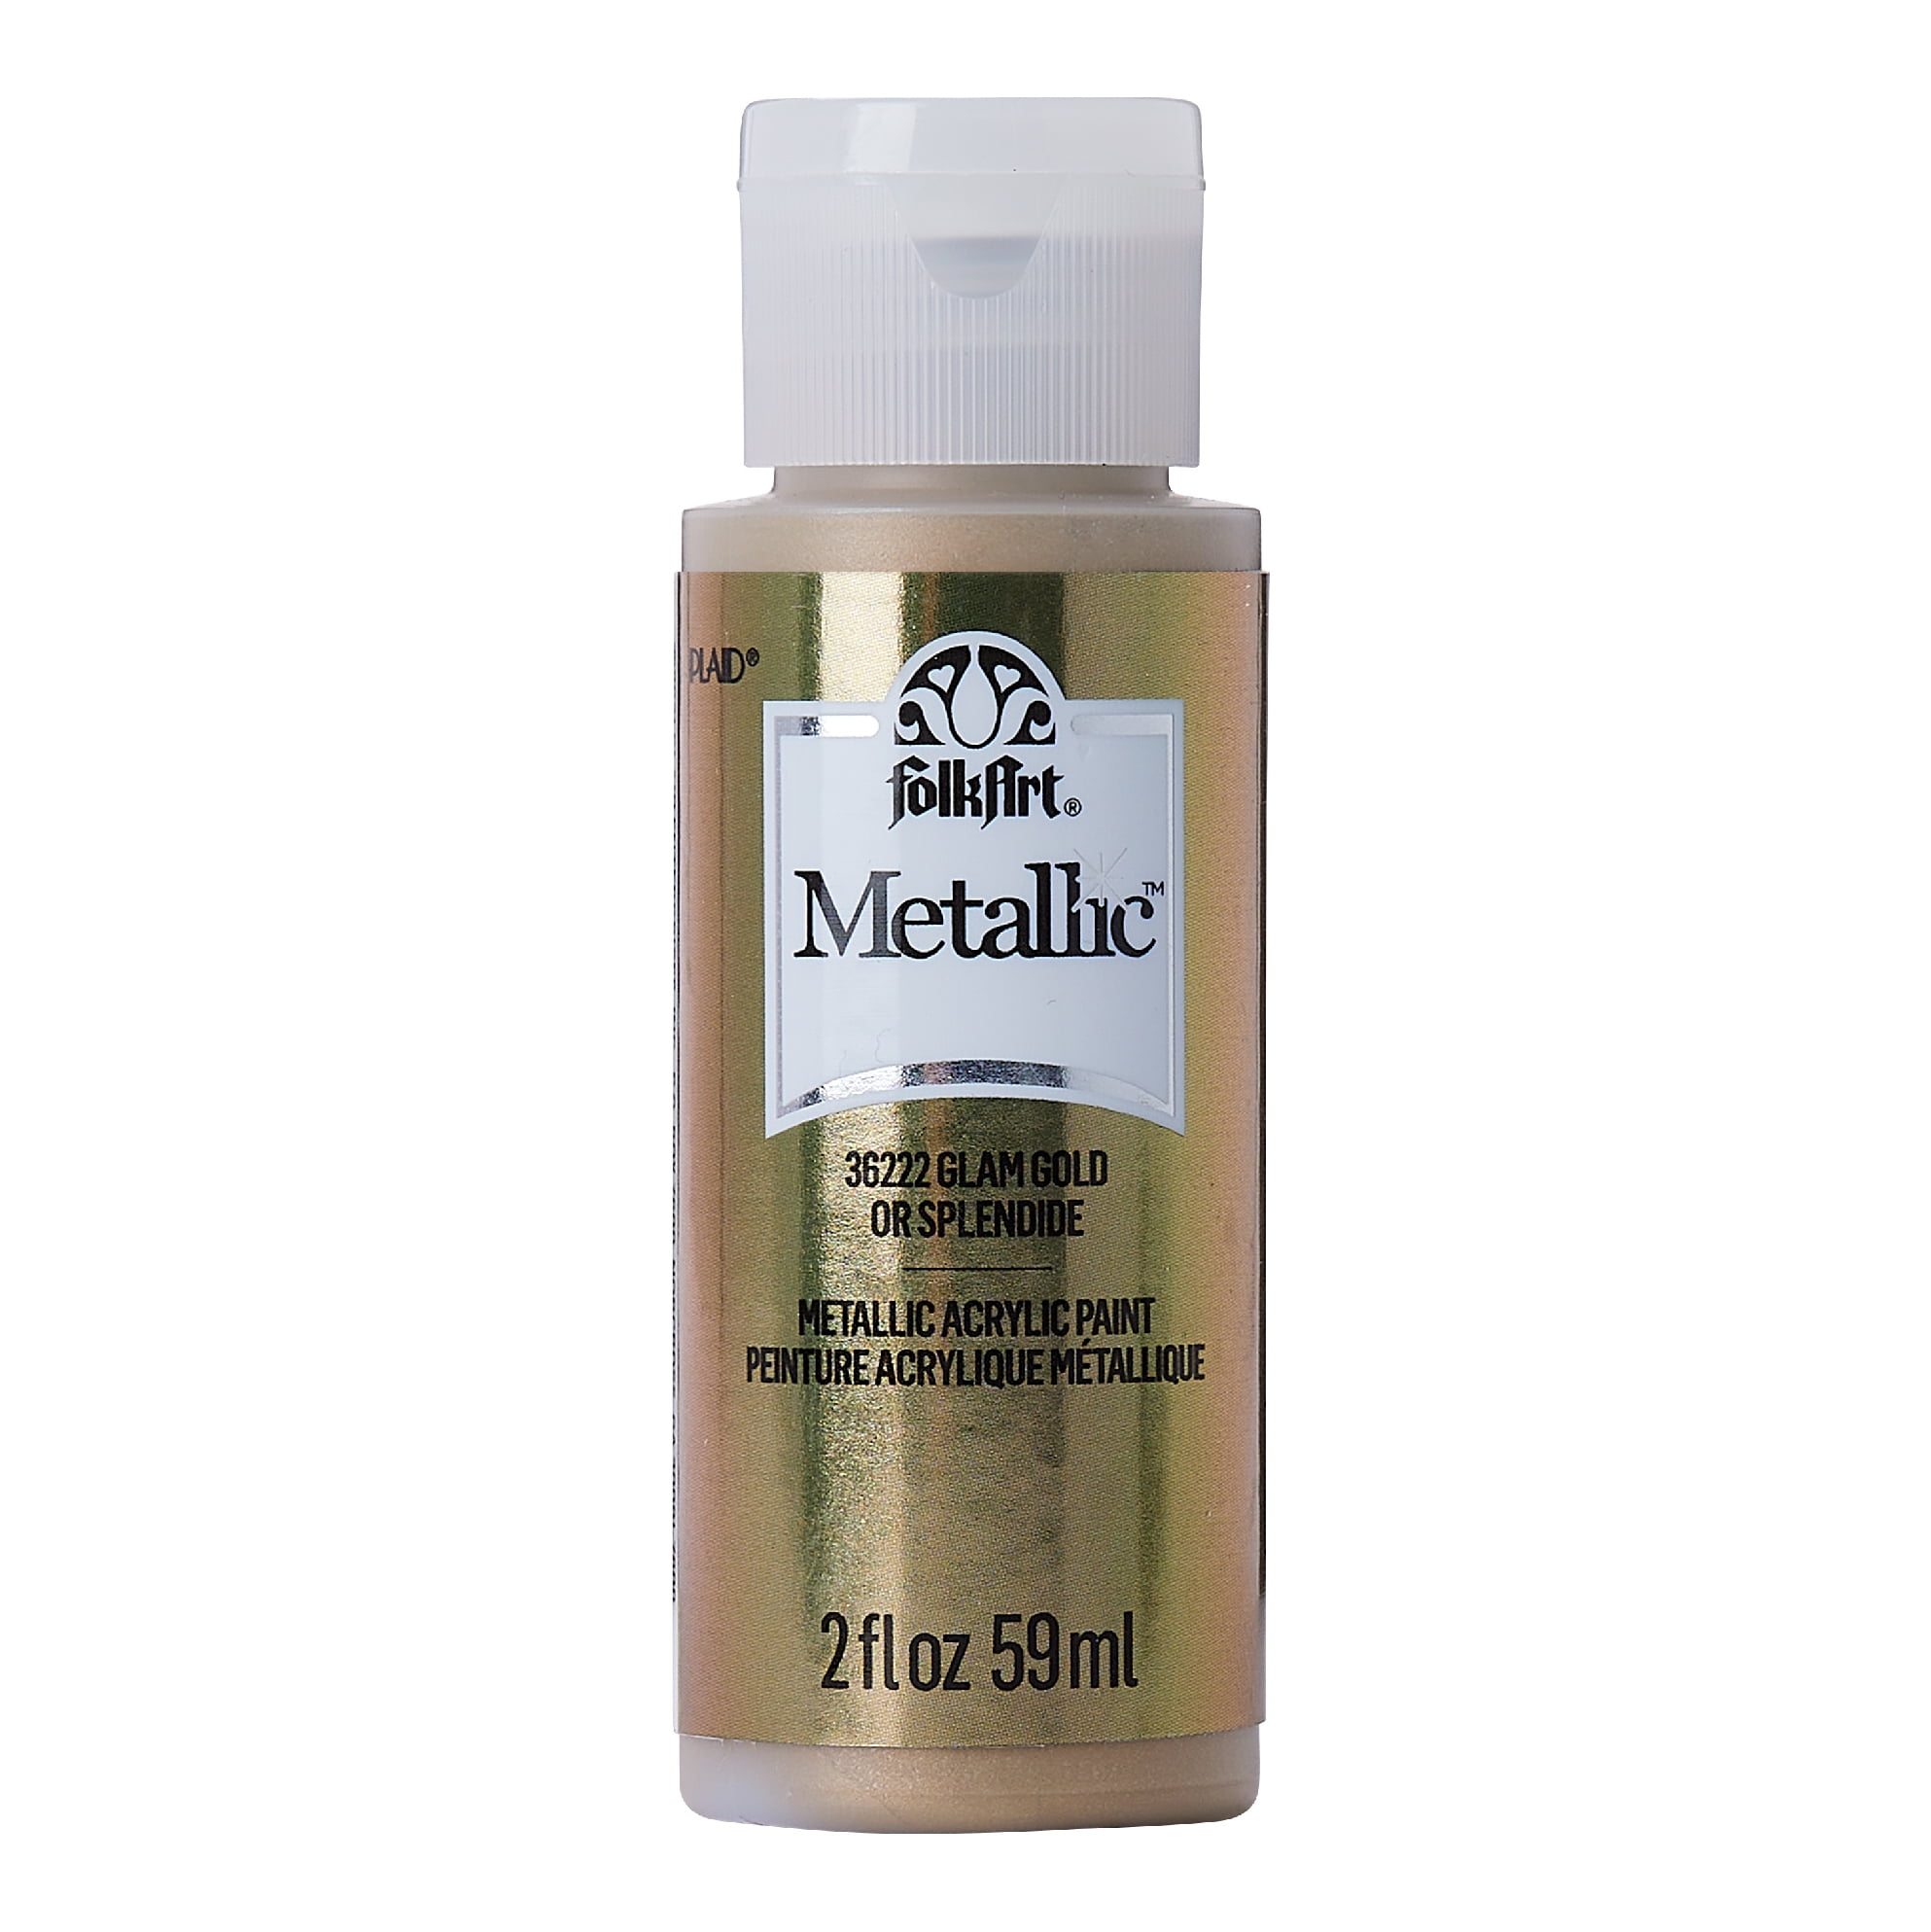 Marie's 500ml Metallic Acrylic Paint - Gold/Sliver - Long-Lasting Brilliant  And Vibrant Colors, Non-Fading, Rich Gold Pigments For Artist Hobby Painte